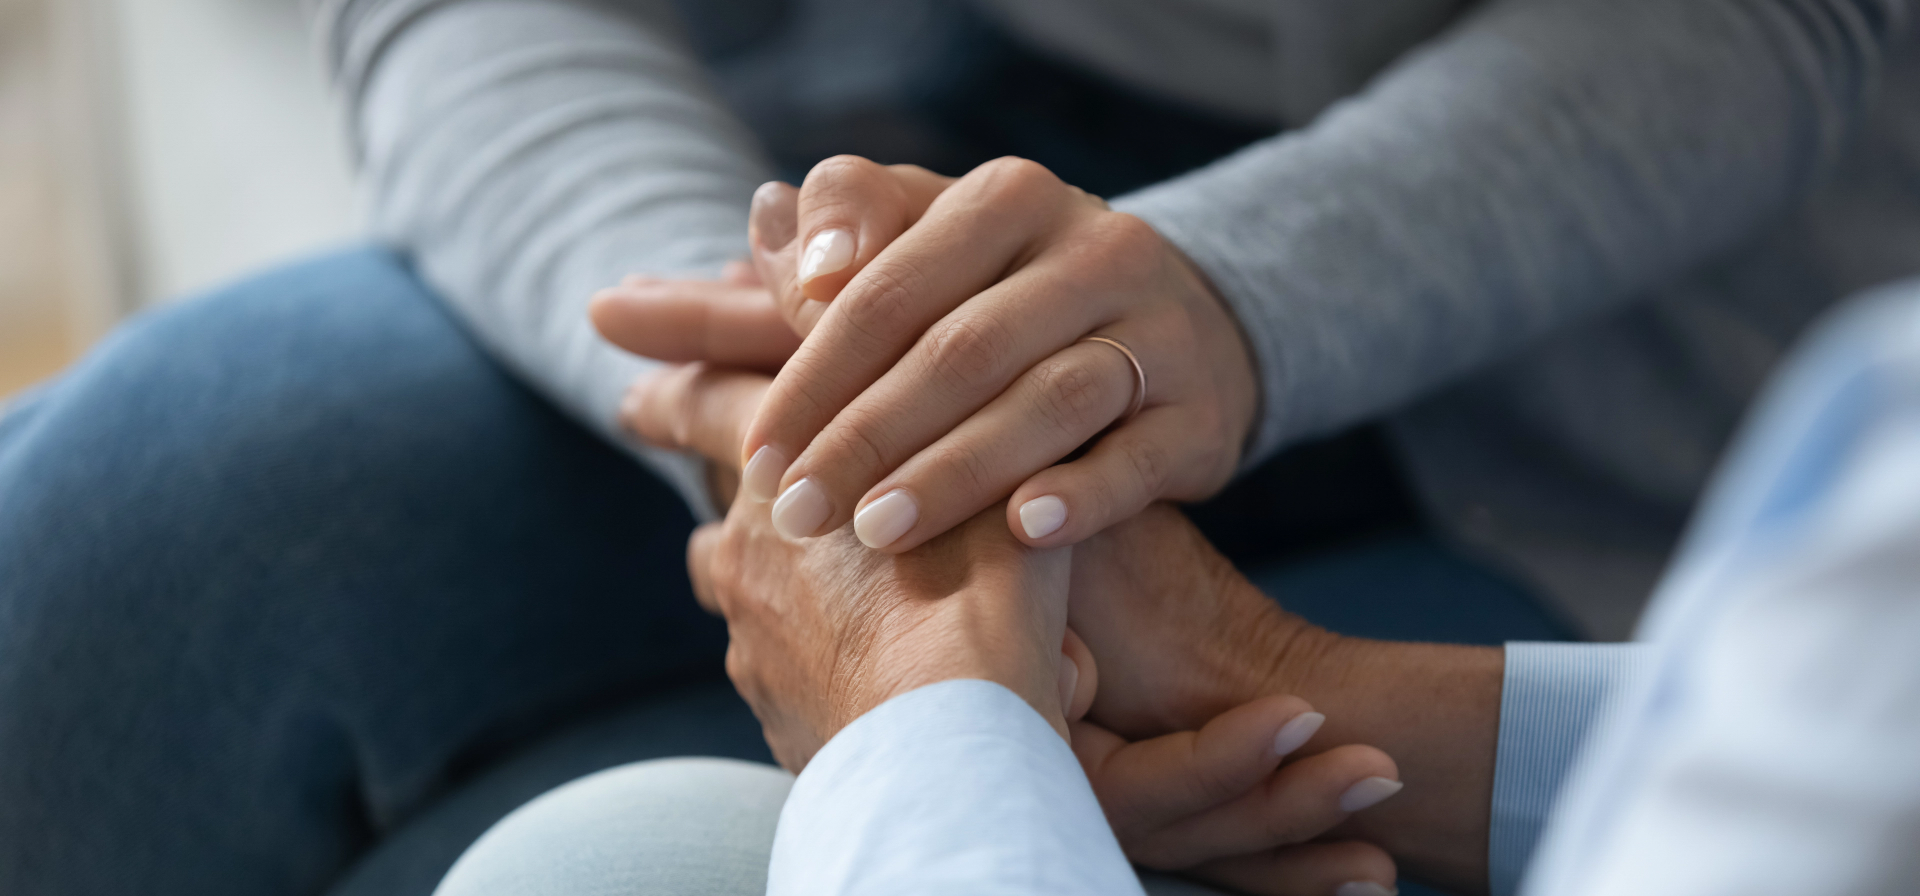 A close-up shot of two people holding hands in a comforting manner.